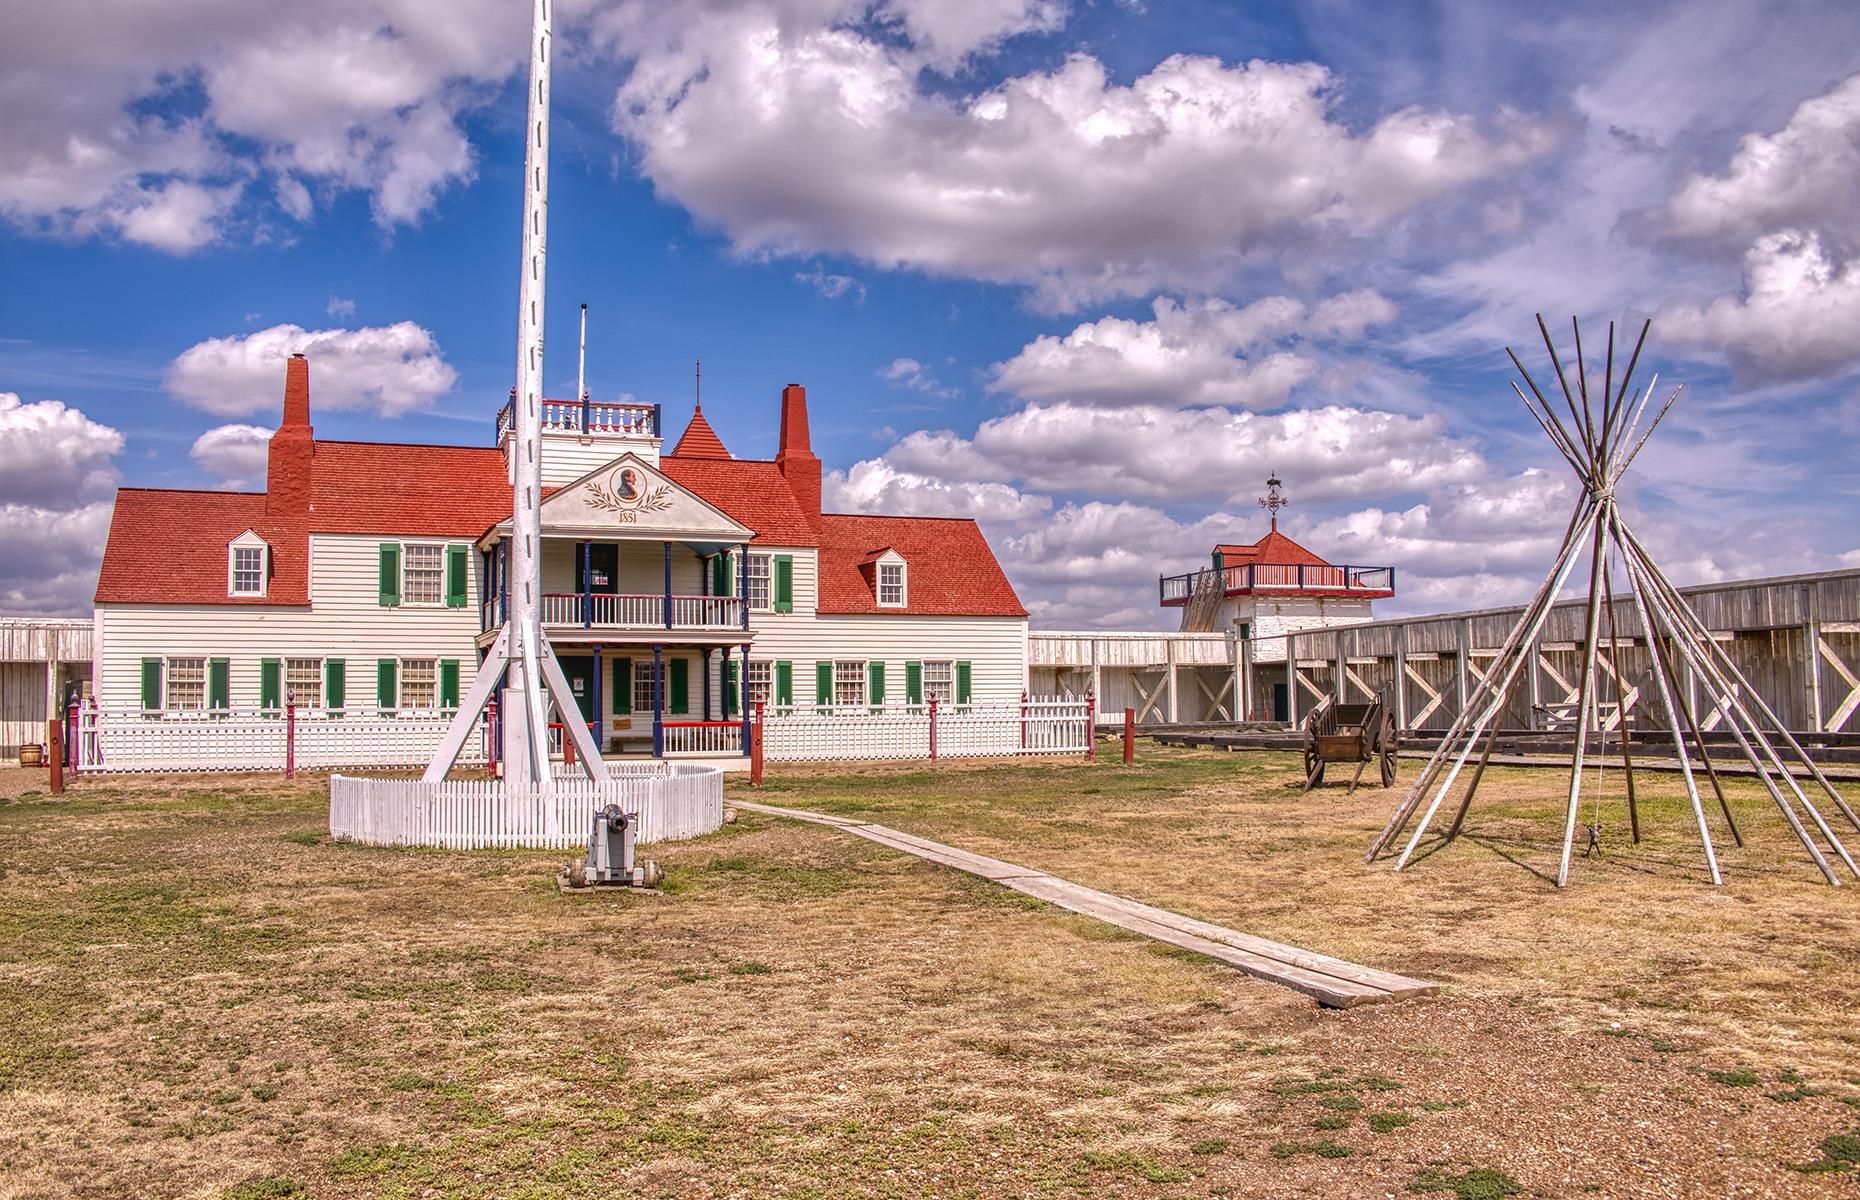 <p>A two-hour <a href="https://www.nps.gov/thingstodo/tour-fort-union-trading-post.htm">self-guided tour</a> lets visitors explore one of the most historic – and curious – trading posts in America. Run by the American Fur Company, it was one of the most important and longest lasting trading posts on the upper Missouri River. Trading guns and ammunition for grizzly and bison furs from the Northern Plains Tribes, the site attracted famous faces such as naturalist John James Audubon and Prince Maximilian of Wied, a German explorer and naturalist. The free walking tour maps out significant places and helps visitors understand the site's importance in American history.</p>